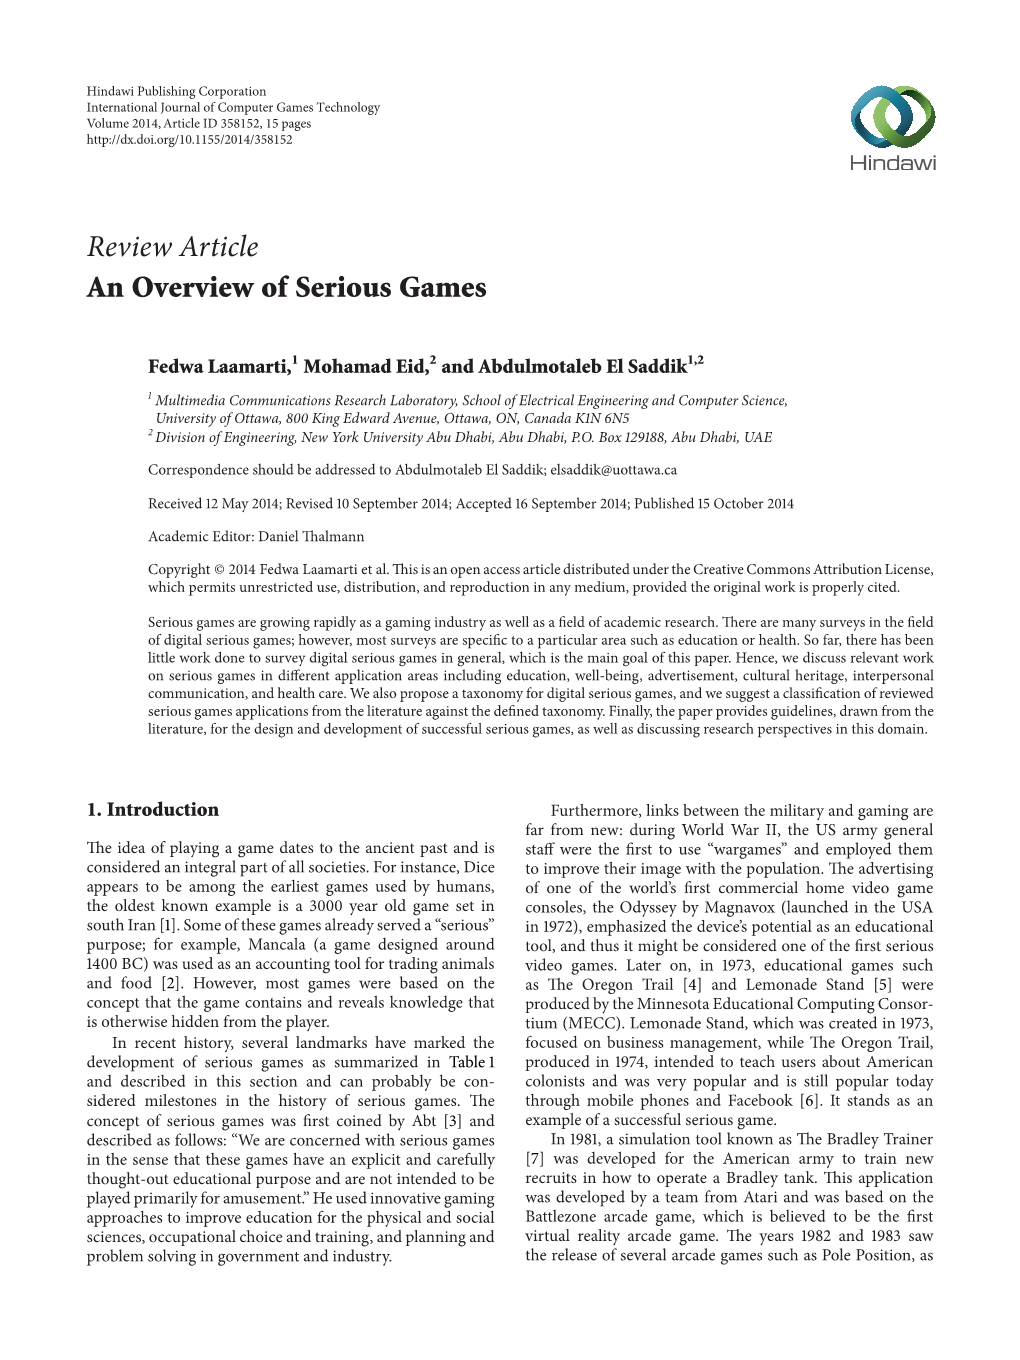 Review Article an Overview of Serious Games